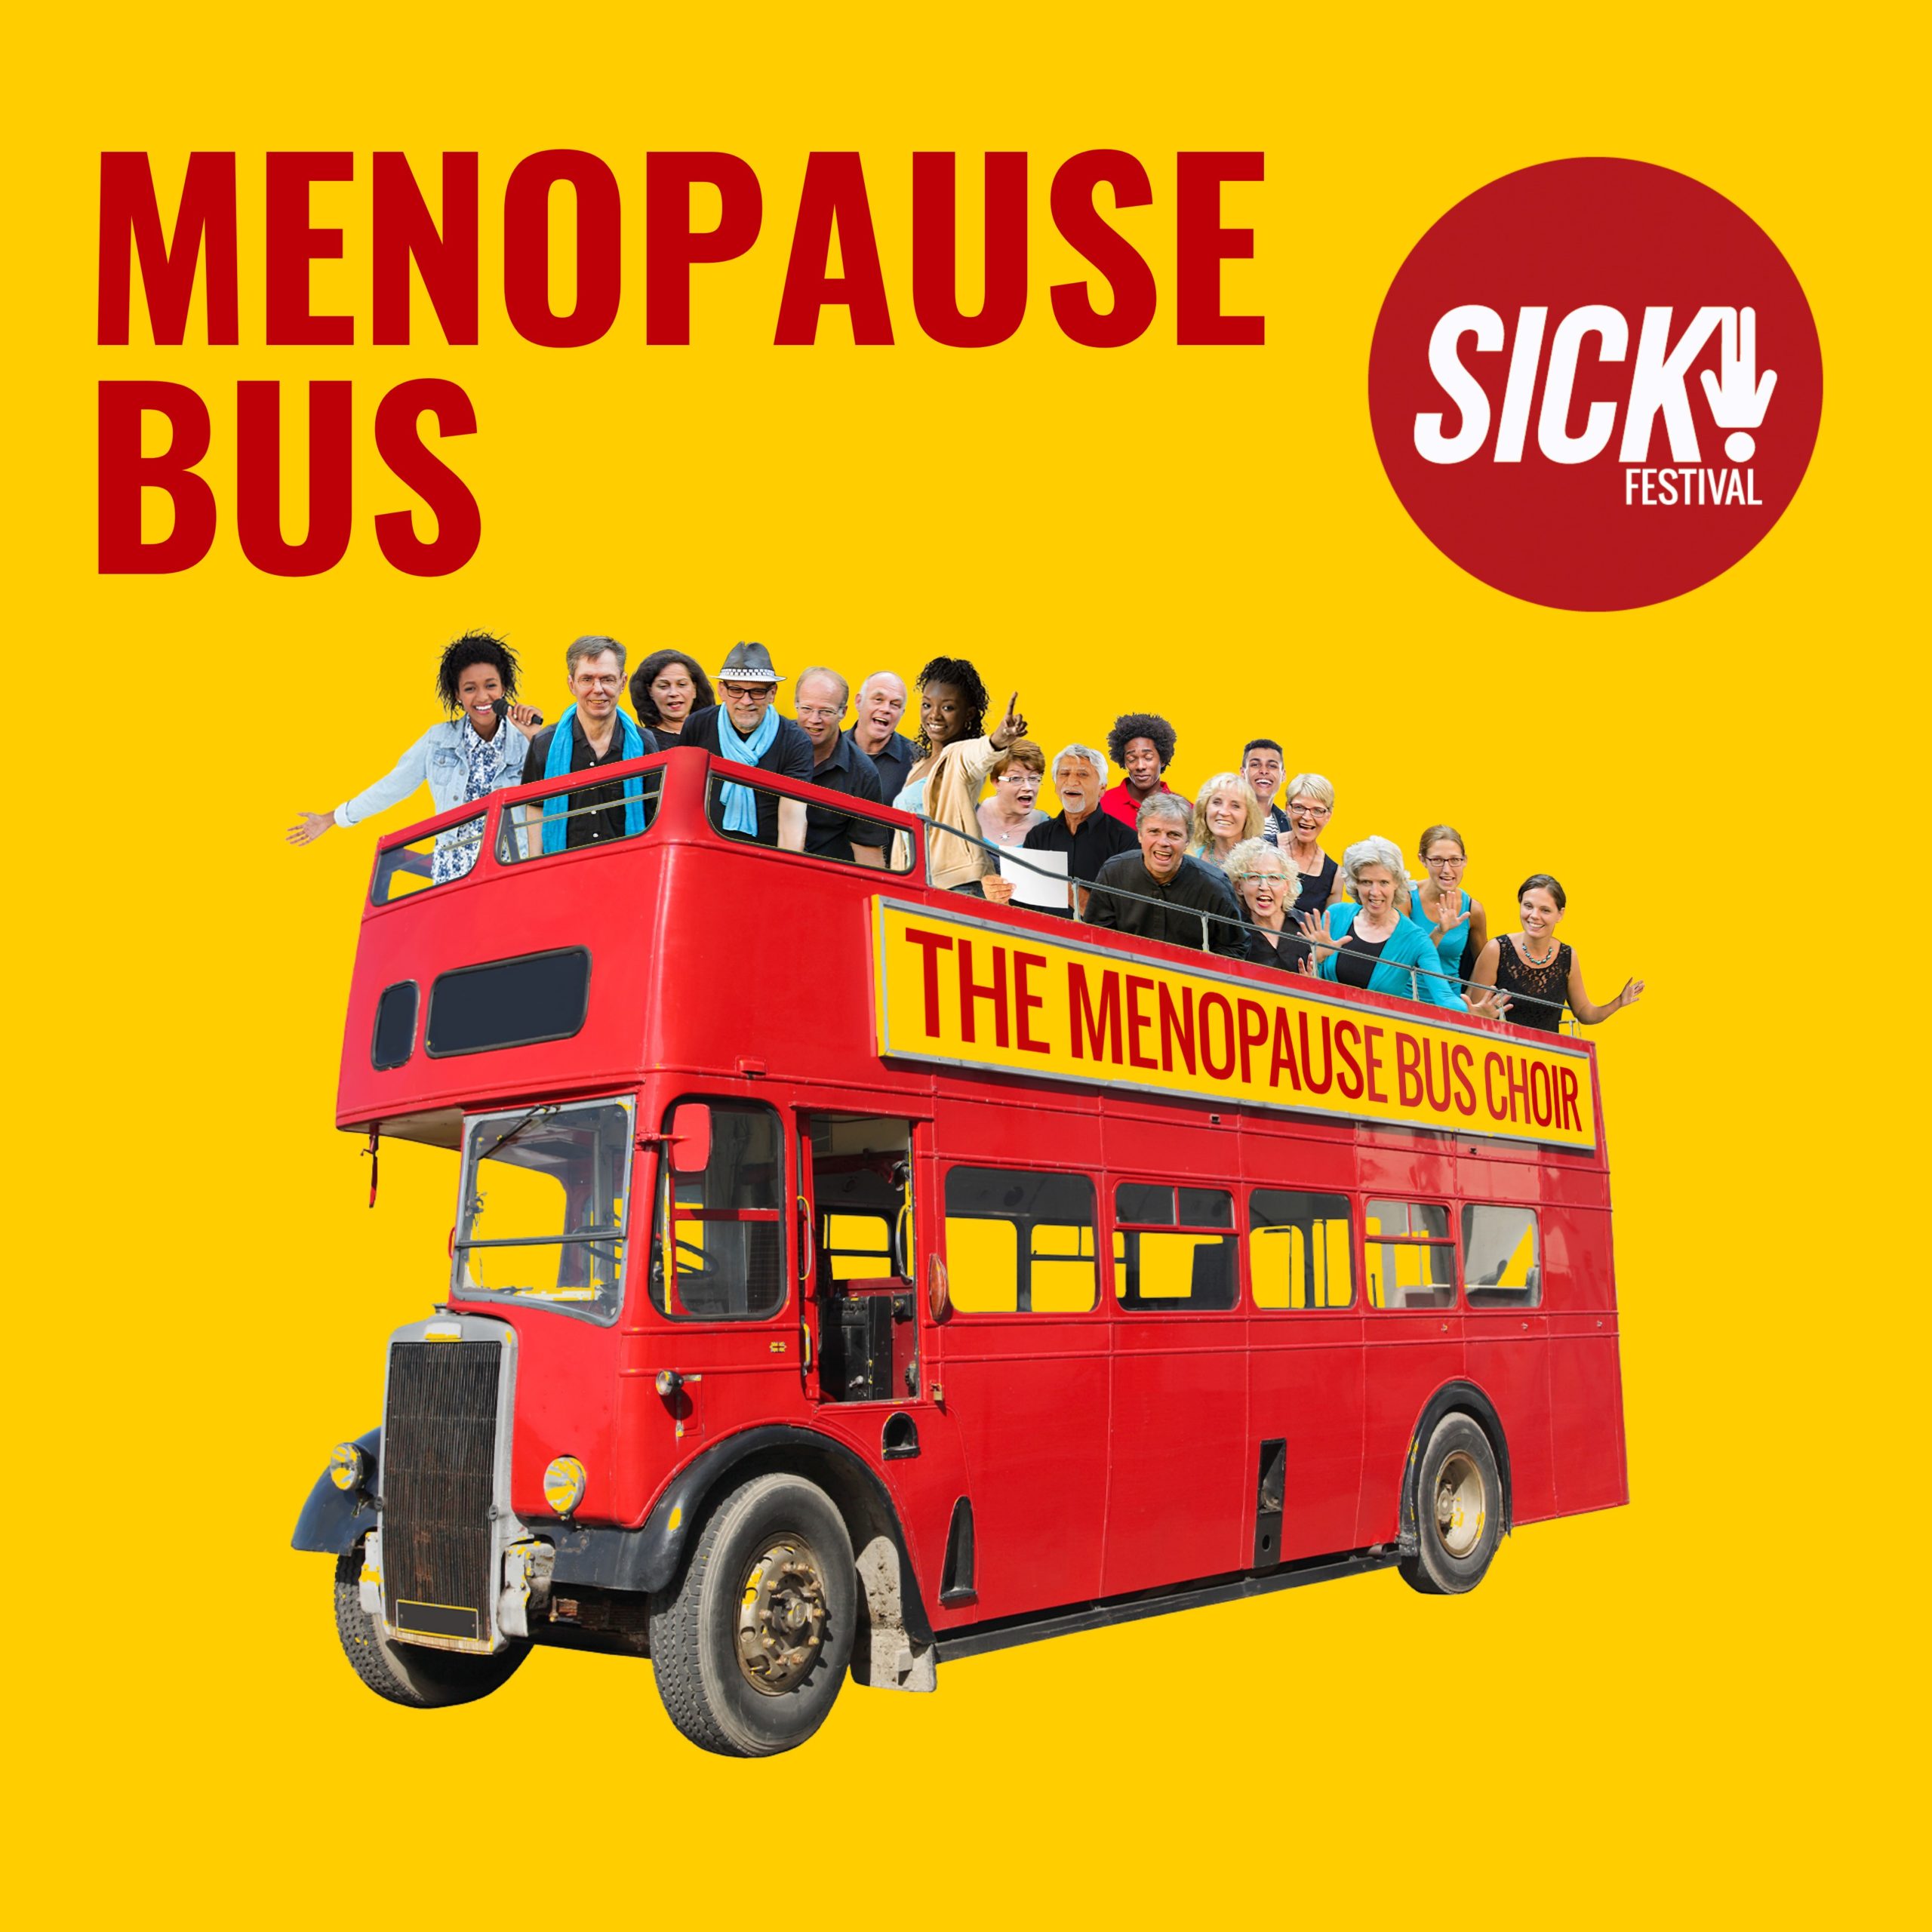 A yellow background with a red Routemaster bus. "MENOPAUSE BUS CHOIR" is written in red and white